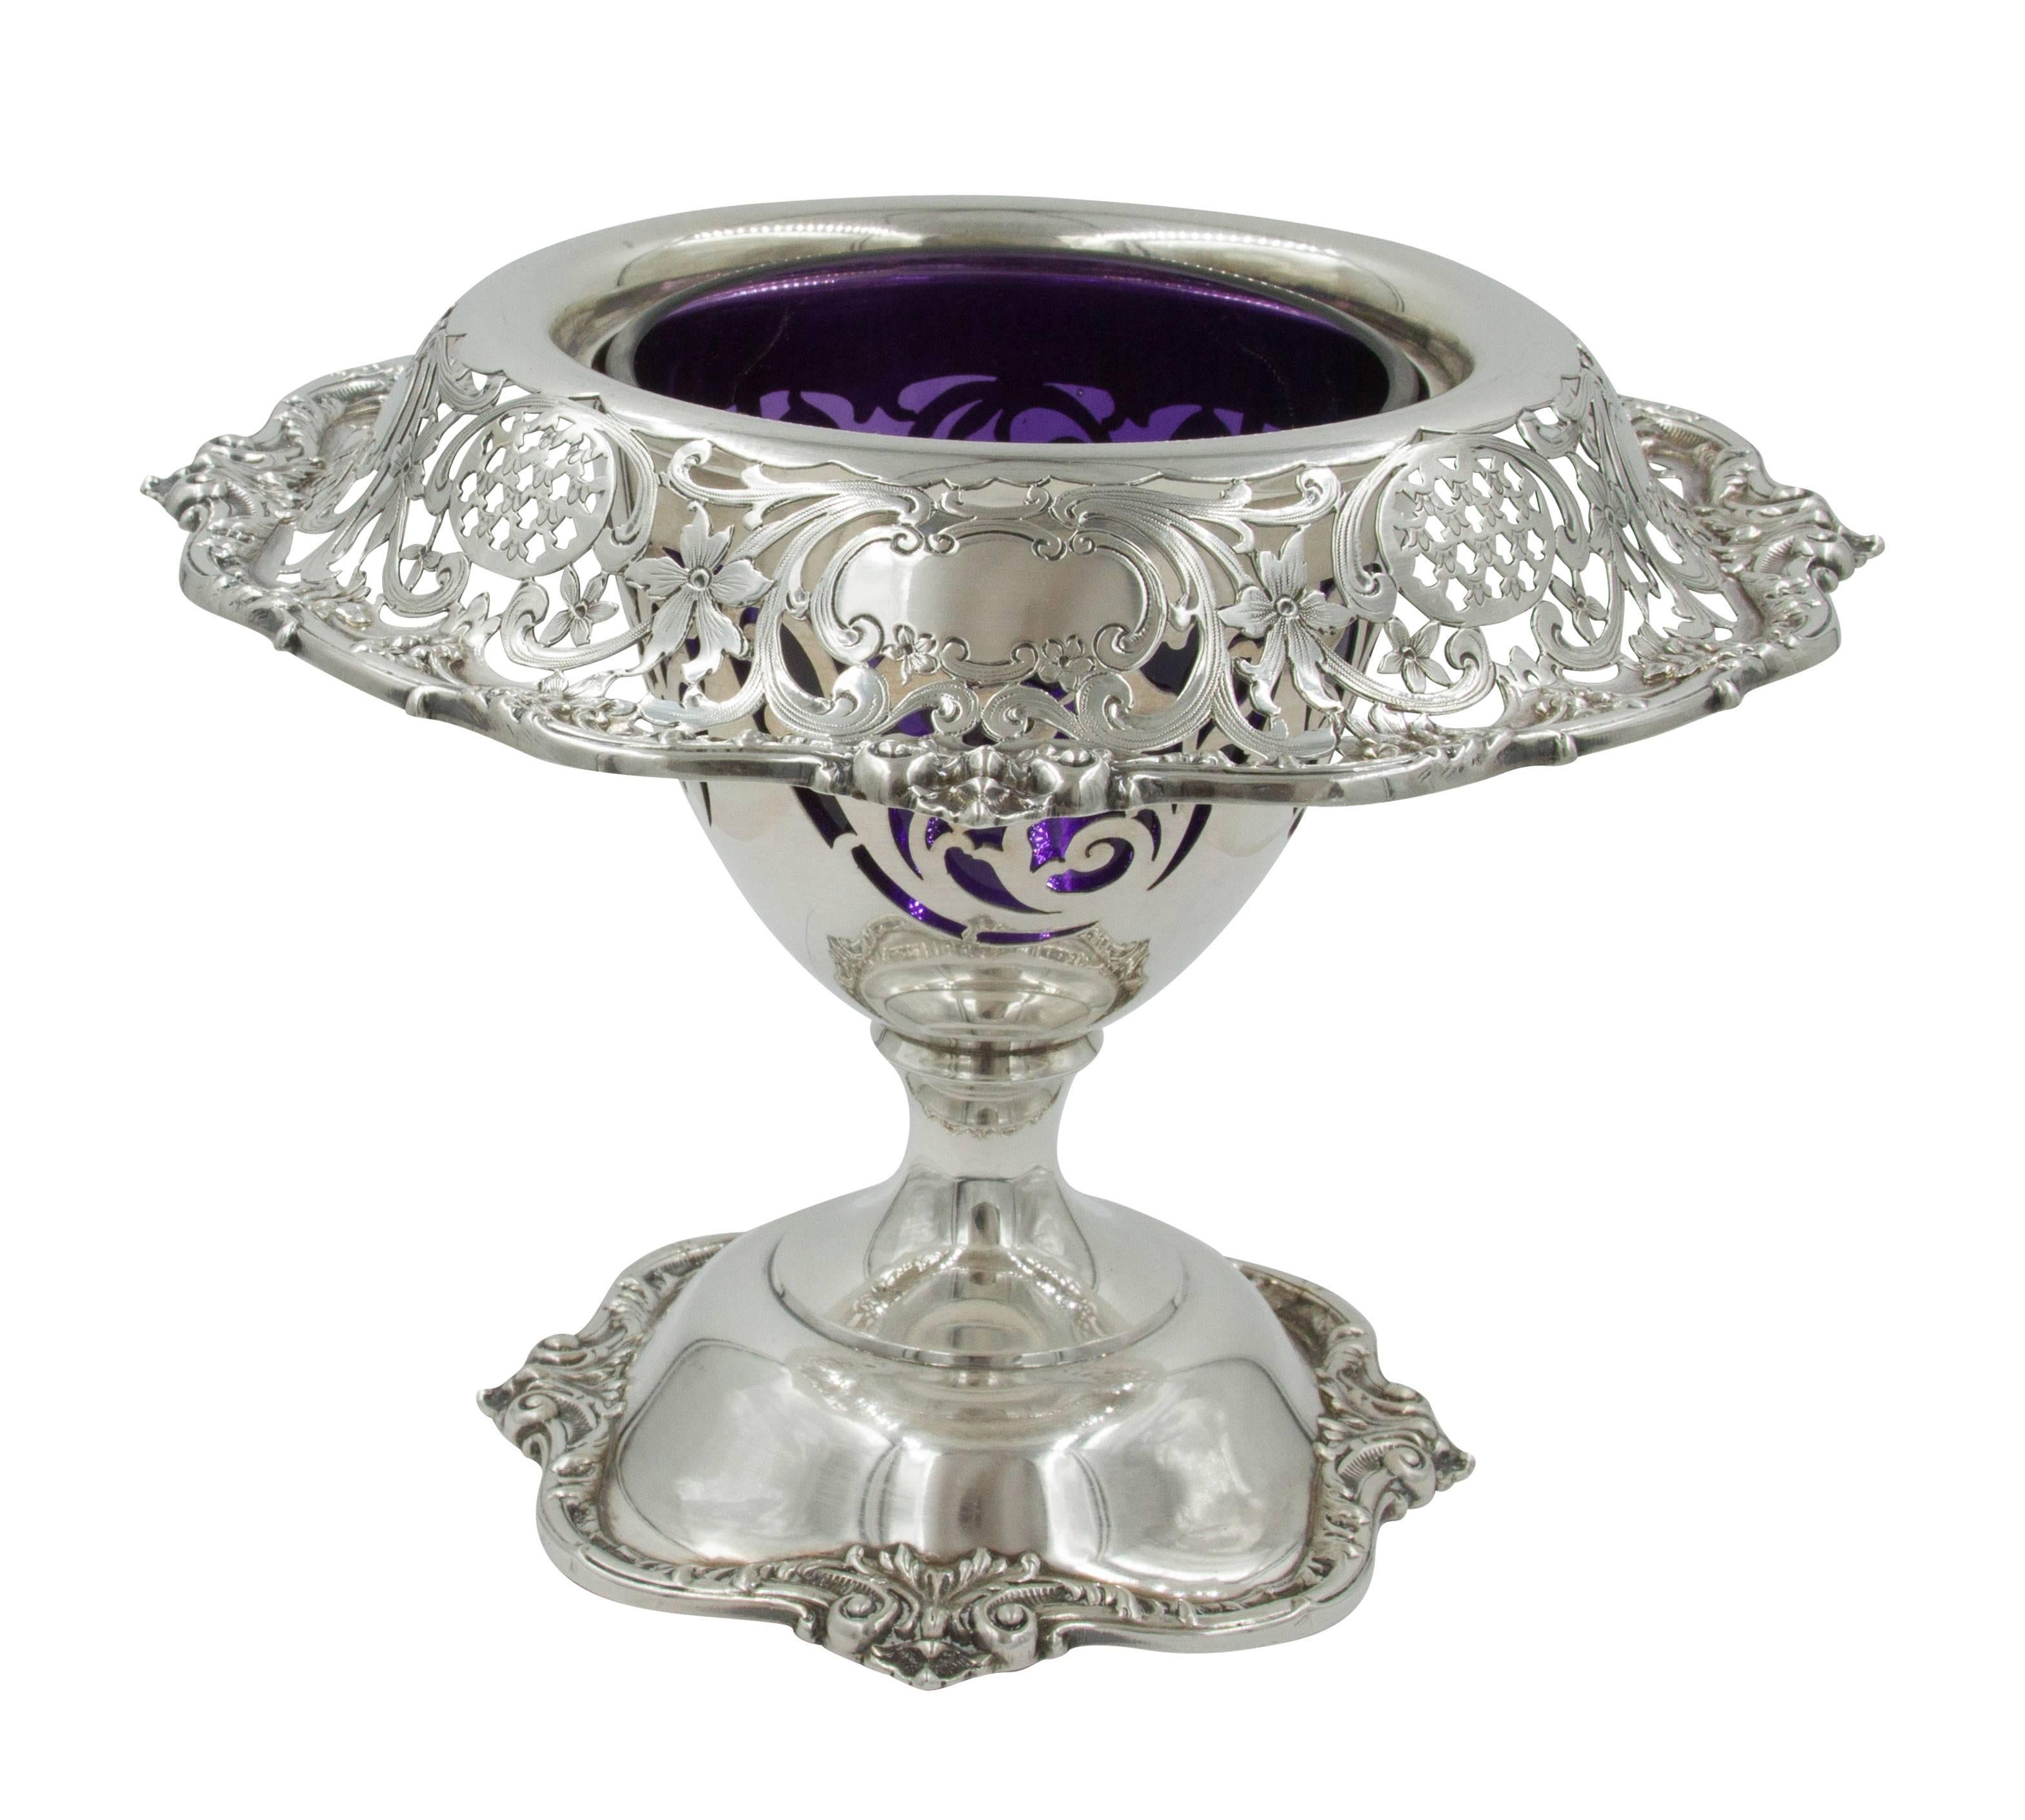 Here are a pair of floral urns with deep purple glass liners. They have scalloped bases as well as a wide rim that is scalloped too. The rim is 2